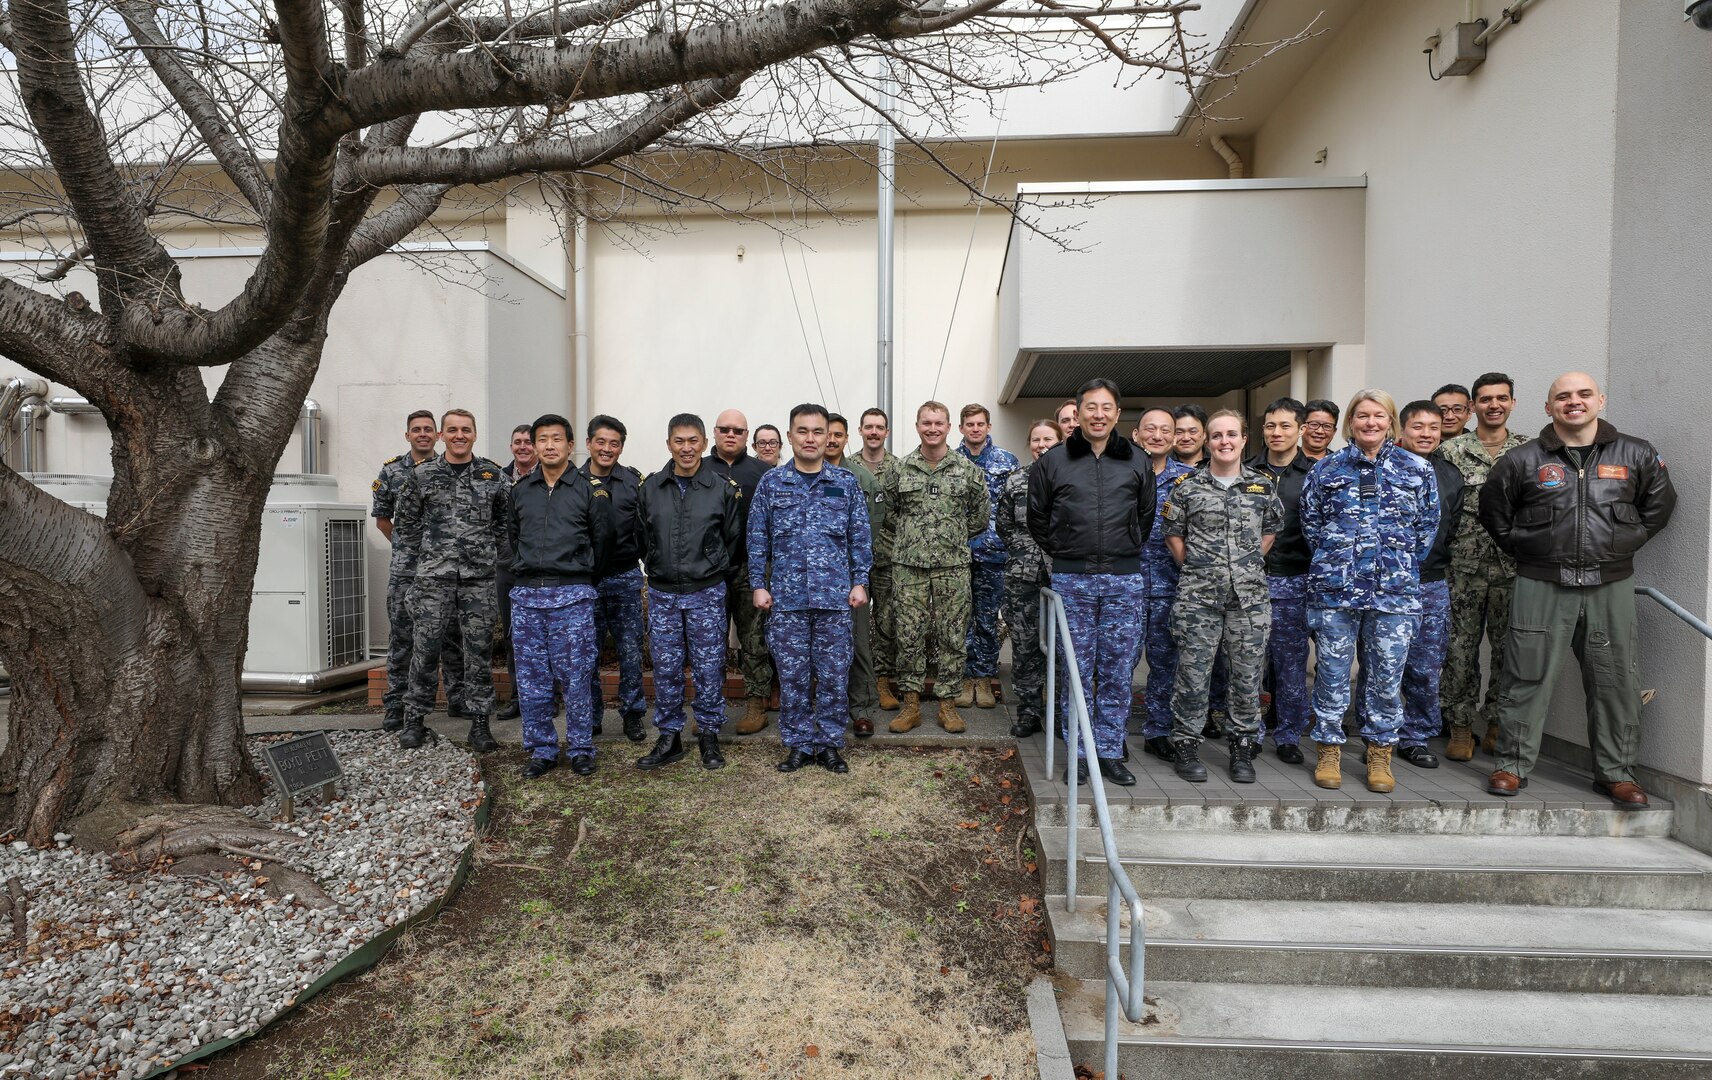 YOKOSUKA, Japan (Feb. 15, 2023) Sailors from the U.S. Navy, Japan Maritime Self-Defense Force (JMSDF), and Royal Australian Armed Forces from the Australian Headquarters Joint Operations Command (HQJOC) from the Australian Headquarters Joint Operations Command (HQJOC) pose for a photo following the trilateral theater anti-submarine warfare (TASW) tabletop exercise (TTX) at Commander, Fleet Activities Yokosuka. The TTX was held to improve information sharing, coordination, and communication between the three countries and across all domains of undersea warfare. (U.S. Navy photo by Mass Communication Specialist 2nd Class Arthur Rosen)